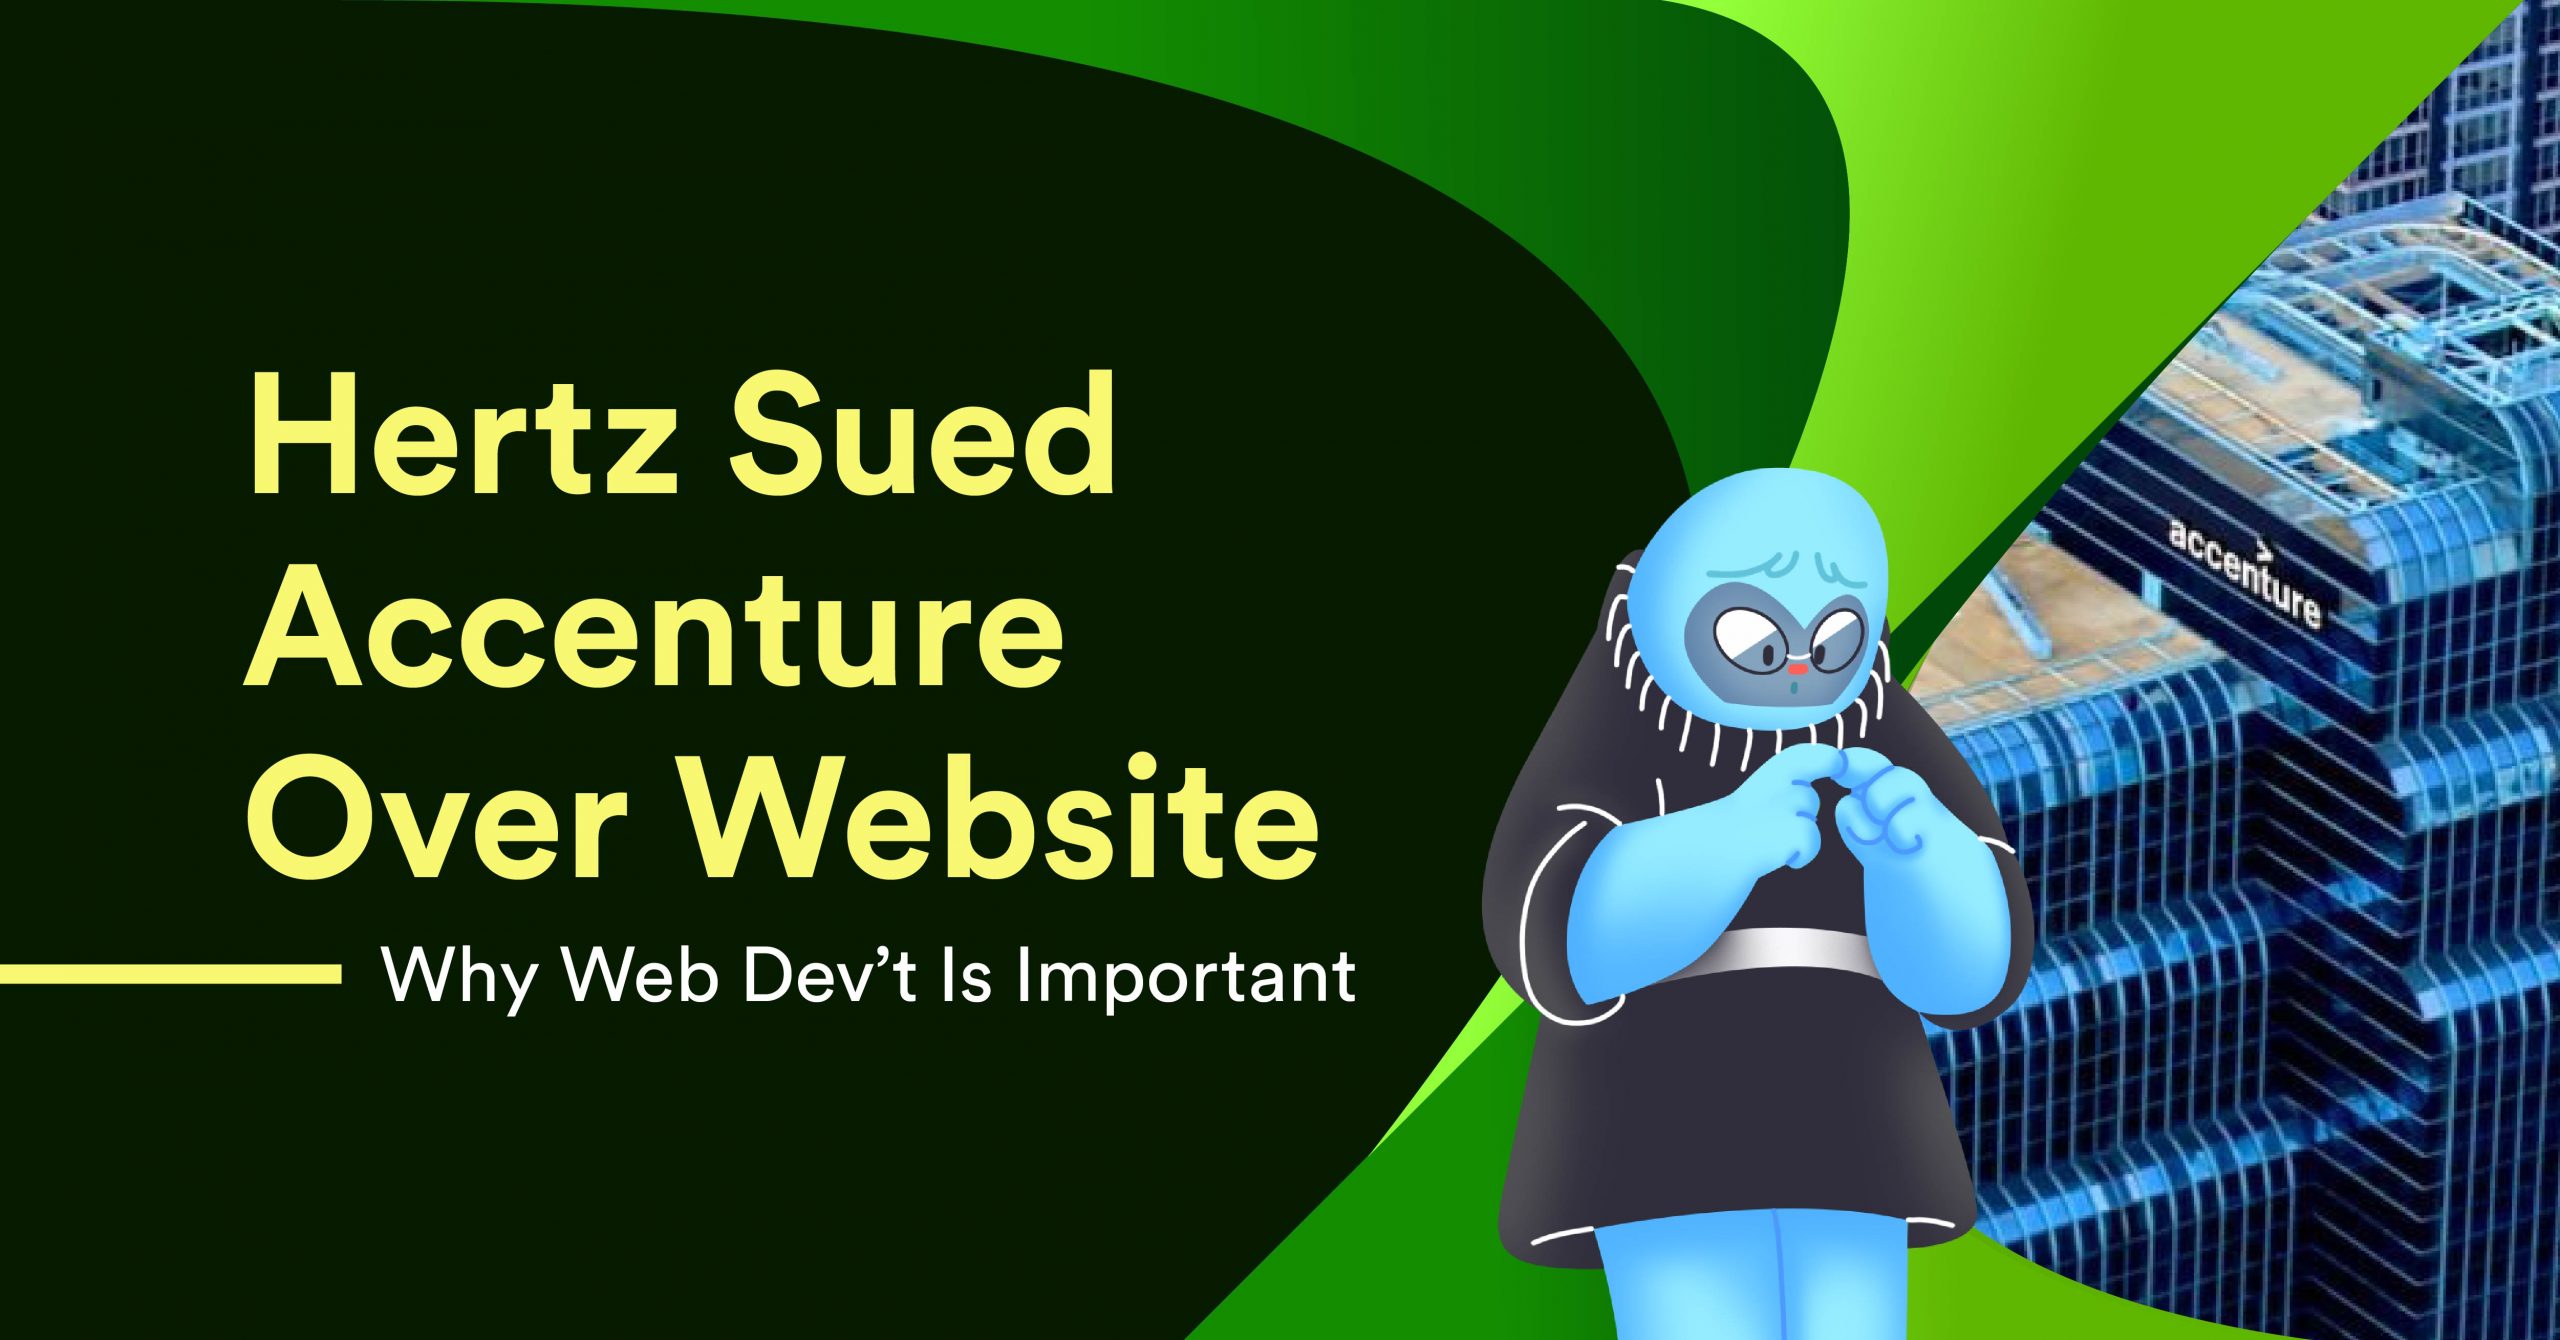 Hertz Sued Accenture Over Website—Why Web Dev’t Is Important